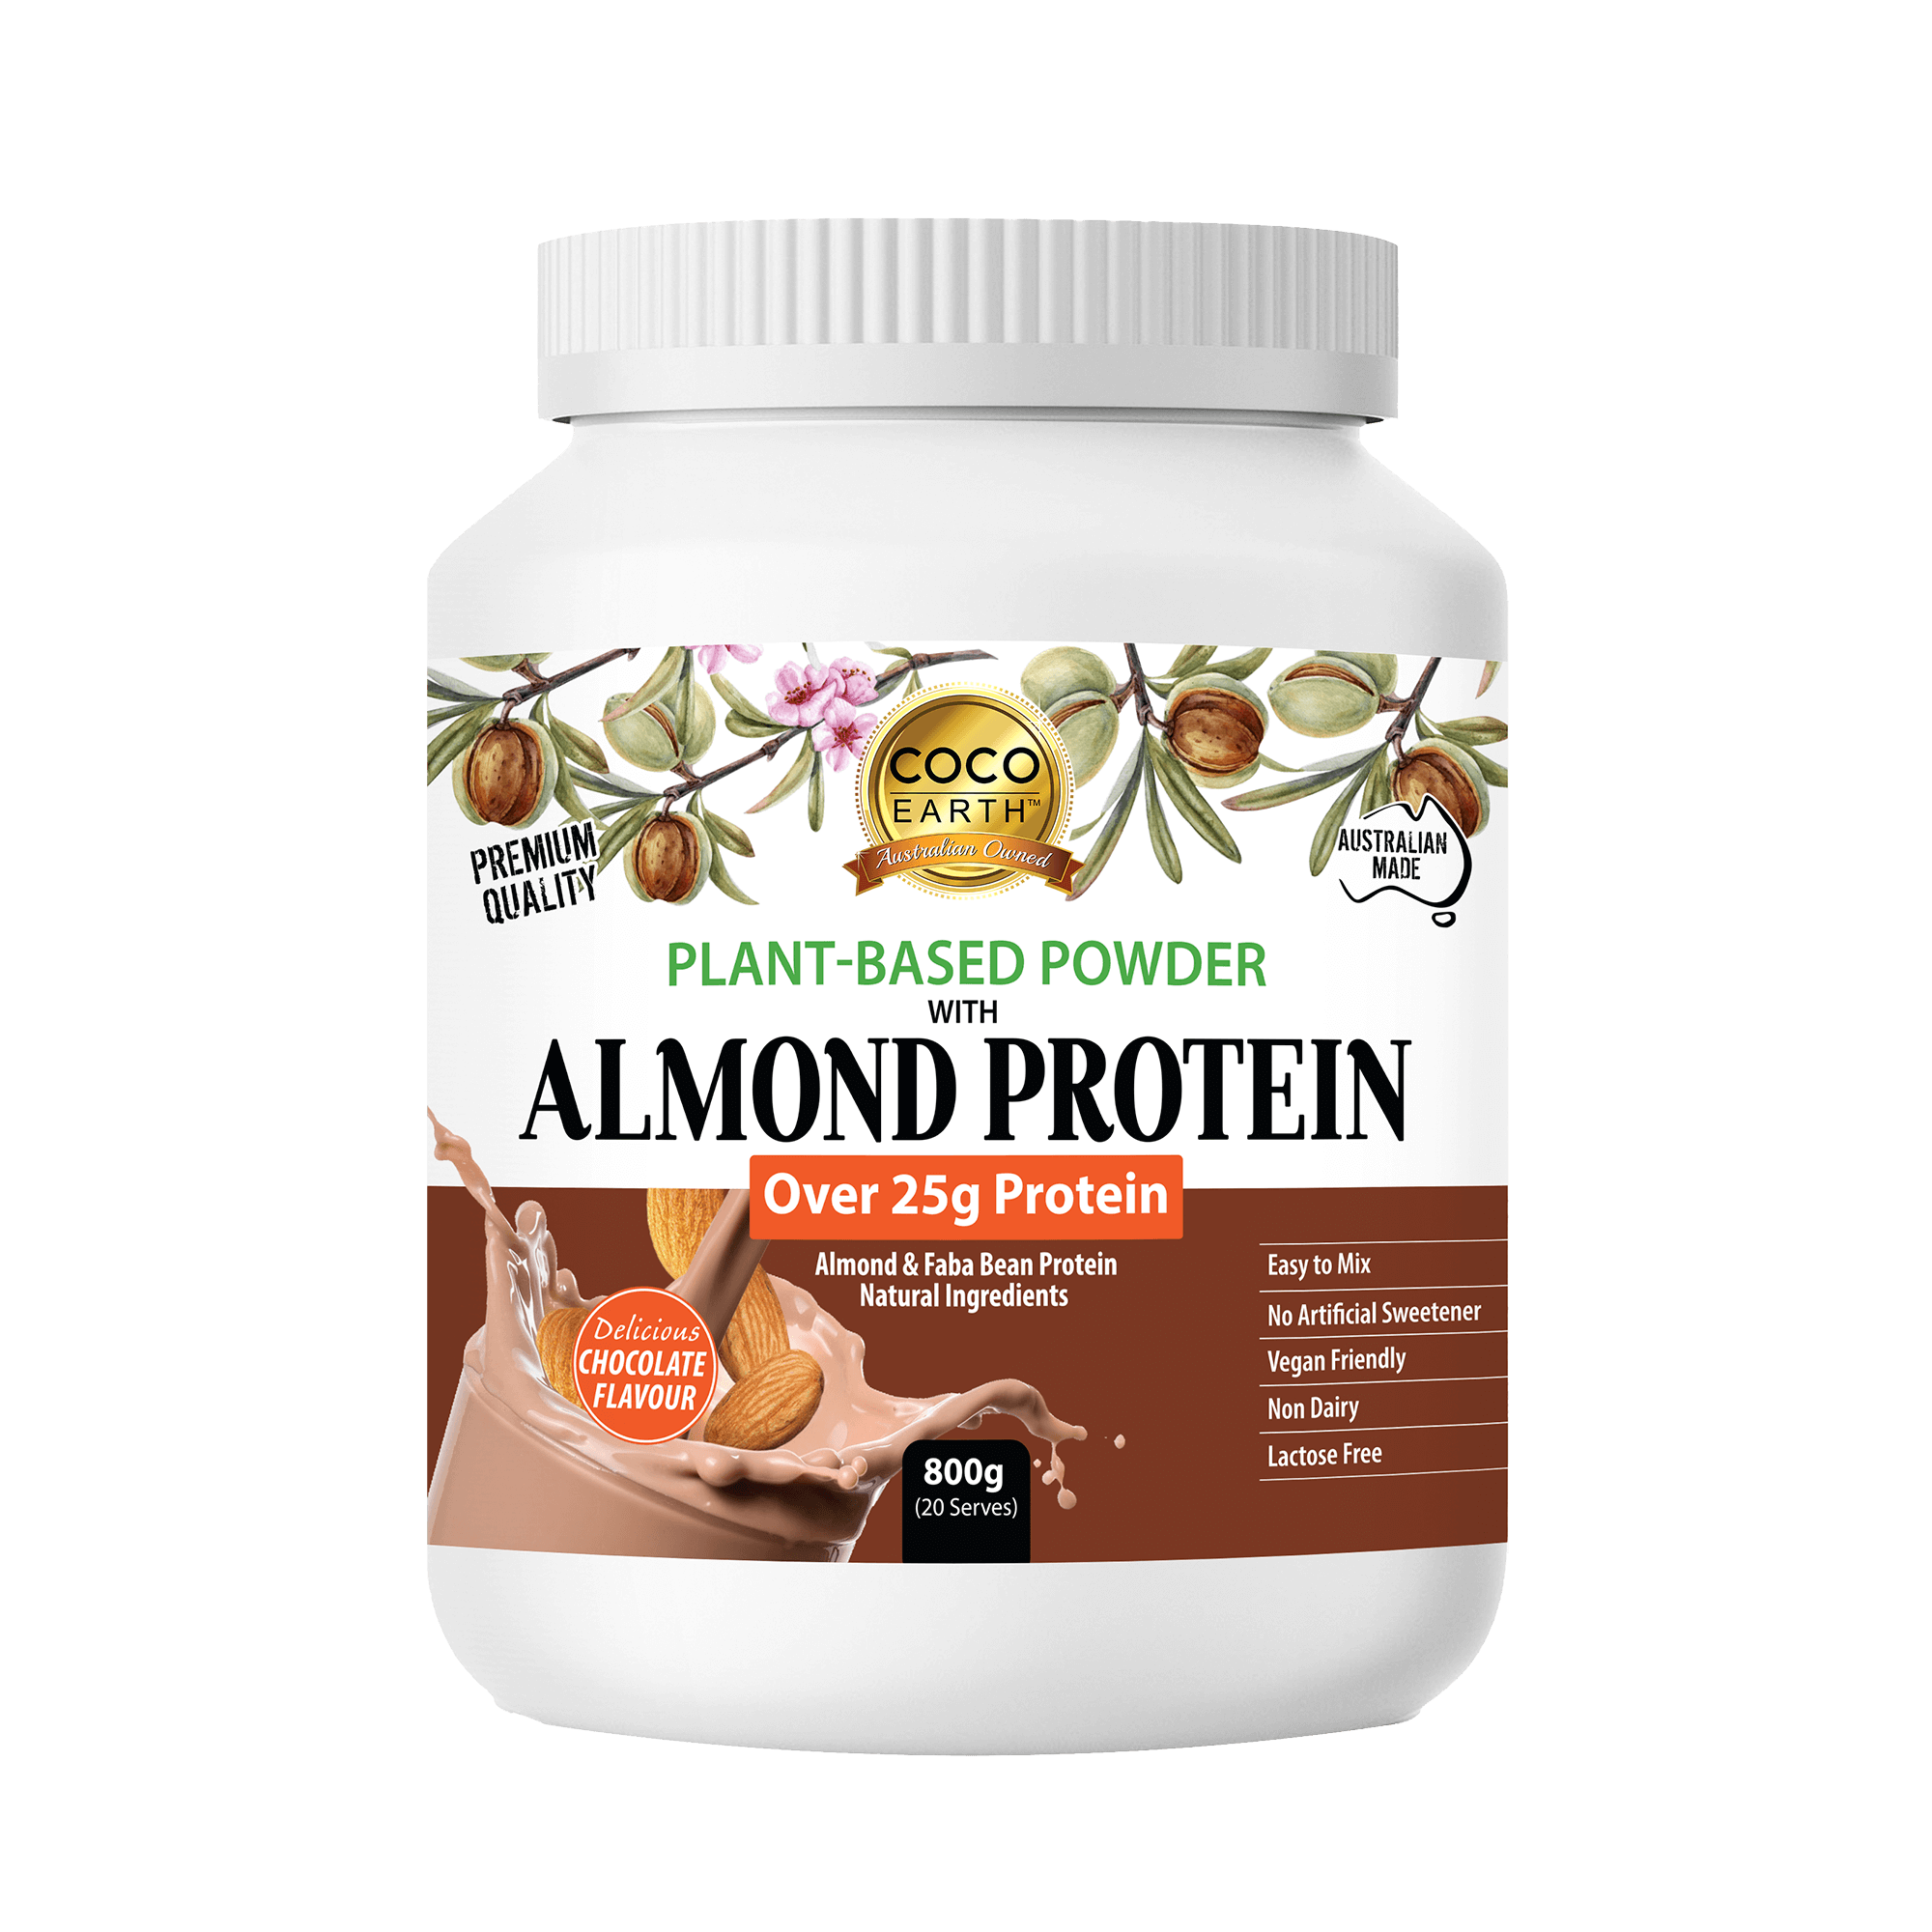 Almond Protein 800g | 20 servings Value Pack